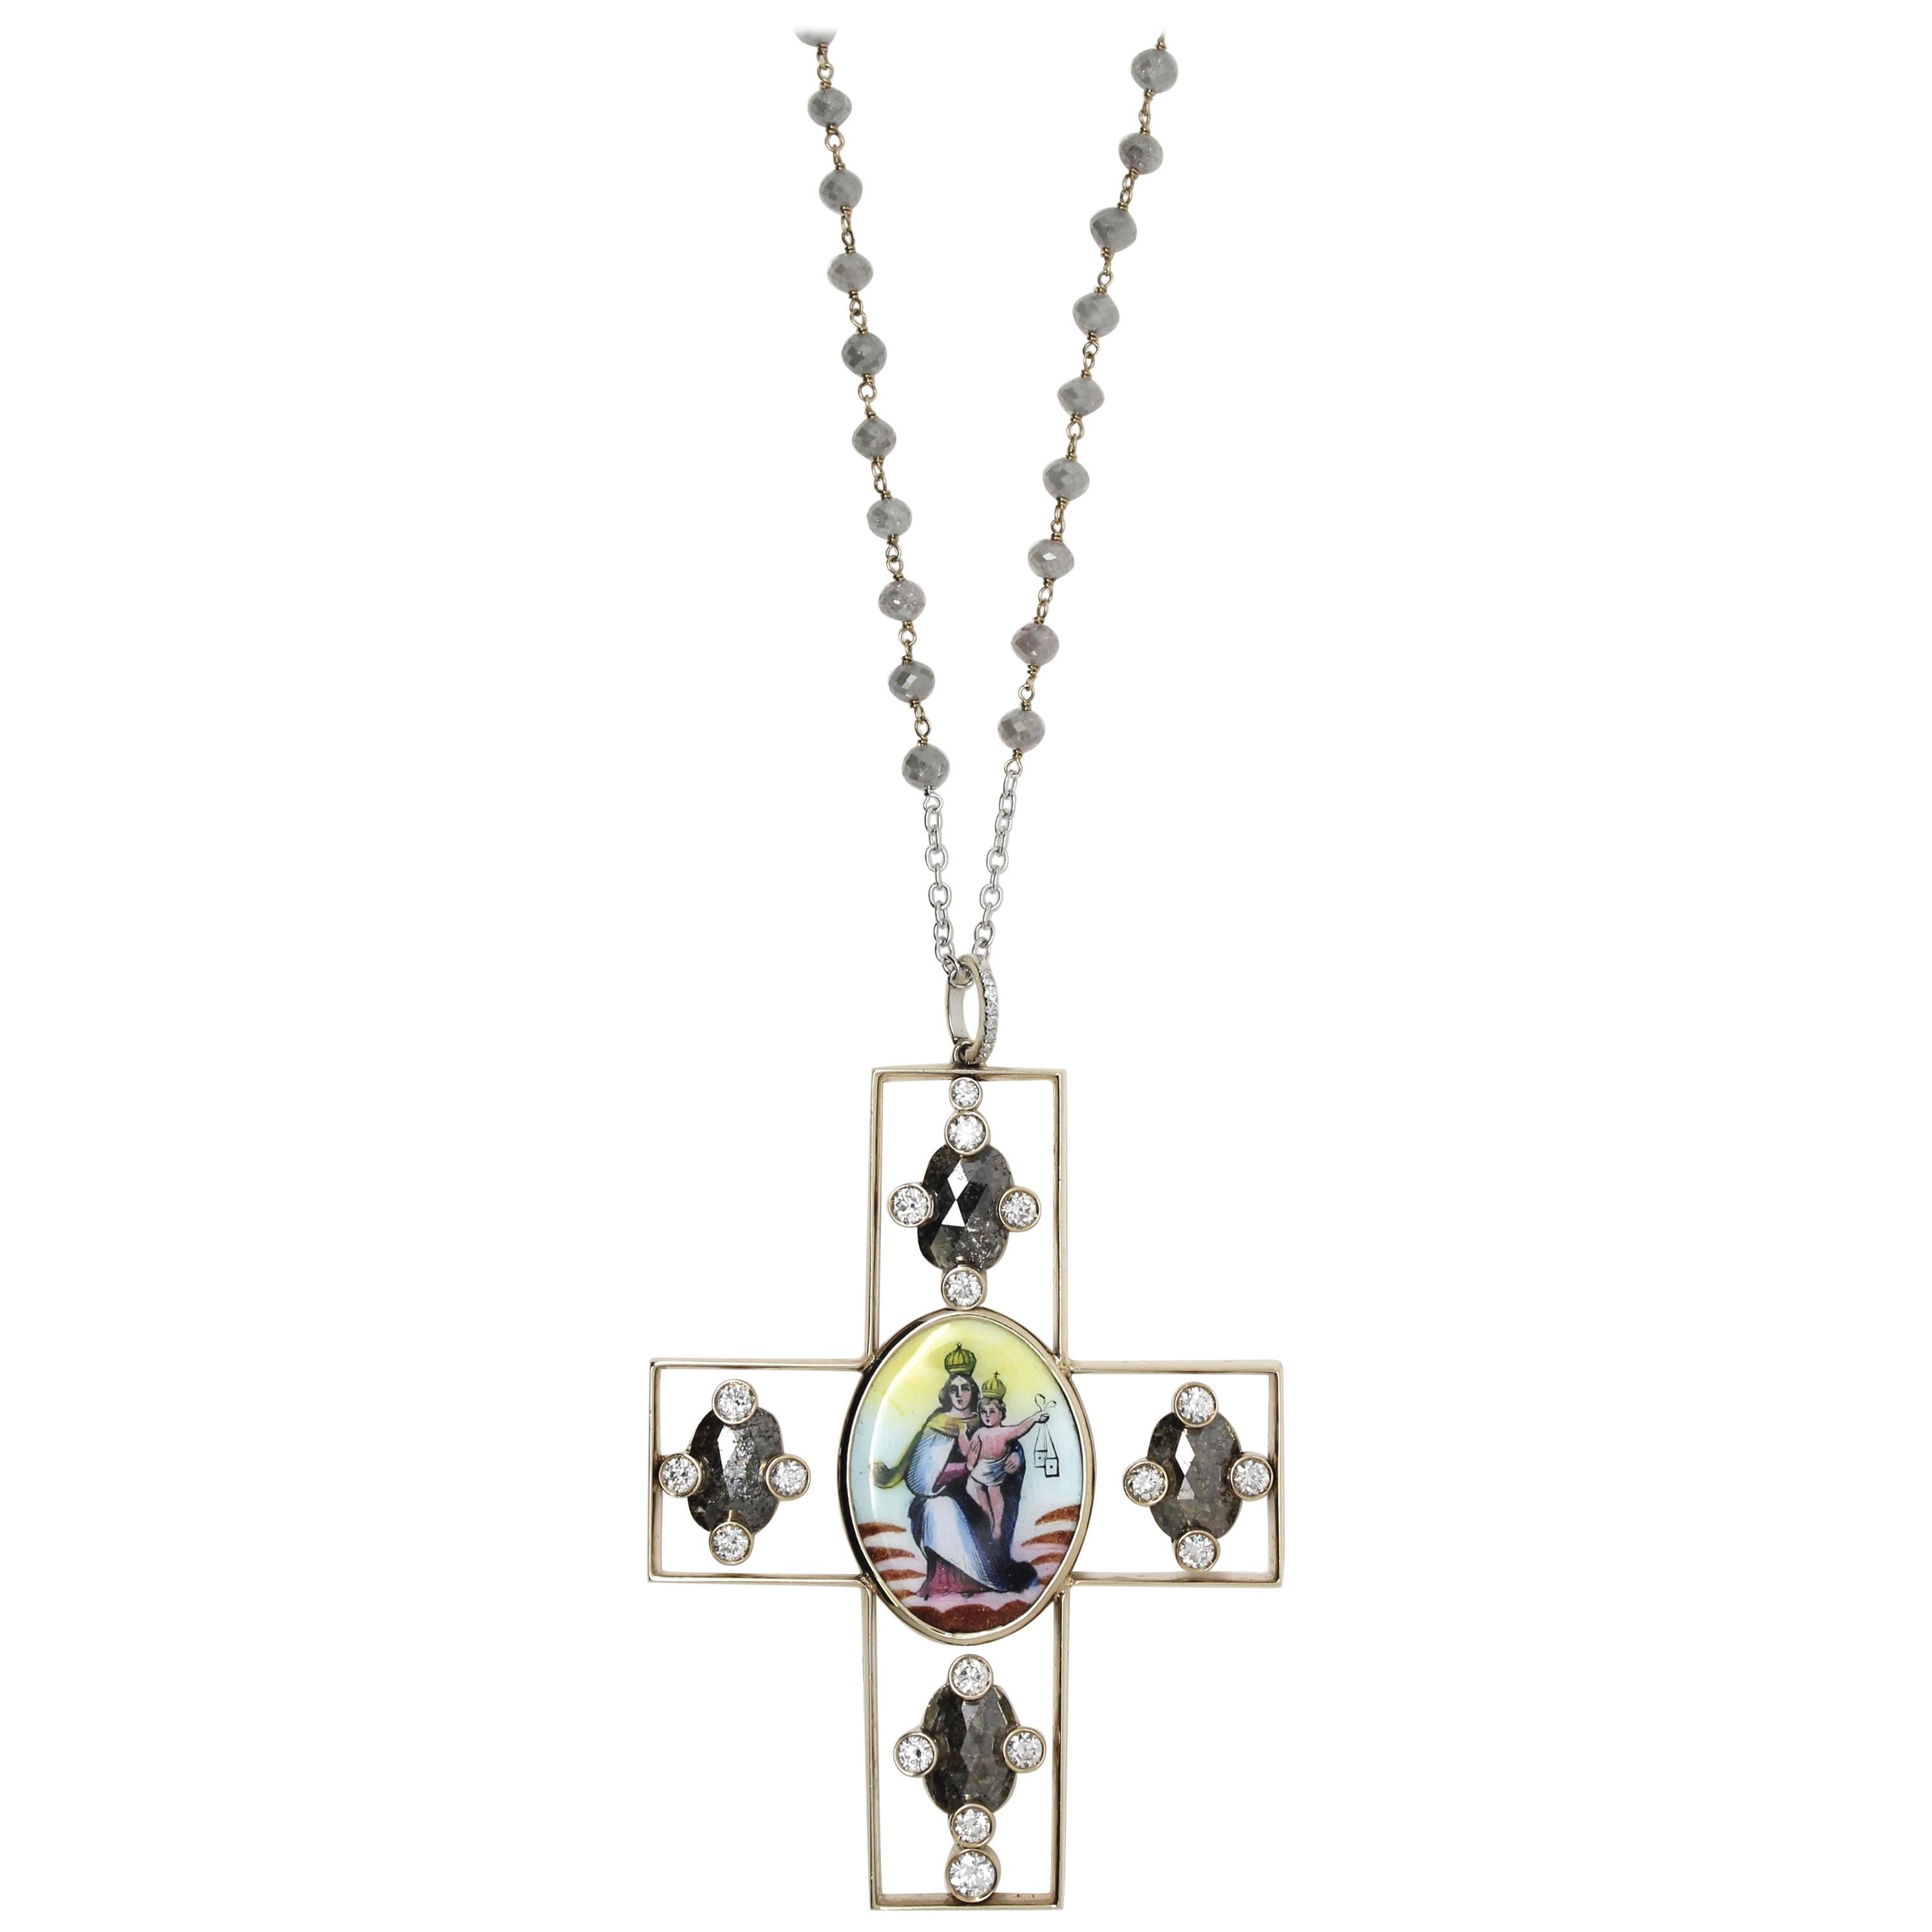 A Modern Rosary Necklace with 50 Grey Diamond Beads combined in 5 sequences spaced out with a white diamond.
The important Pendant Cross has an Enamelled  Holy Image in the centre, and is decorated with 4 Milky Grey Oval Rose-Cut Diamonds, each